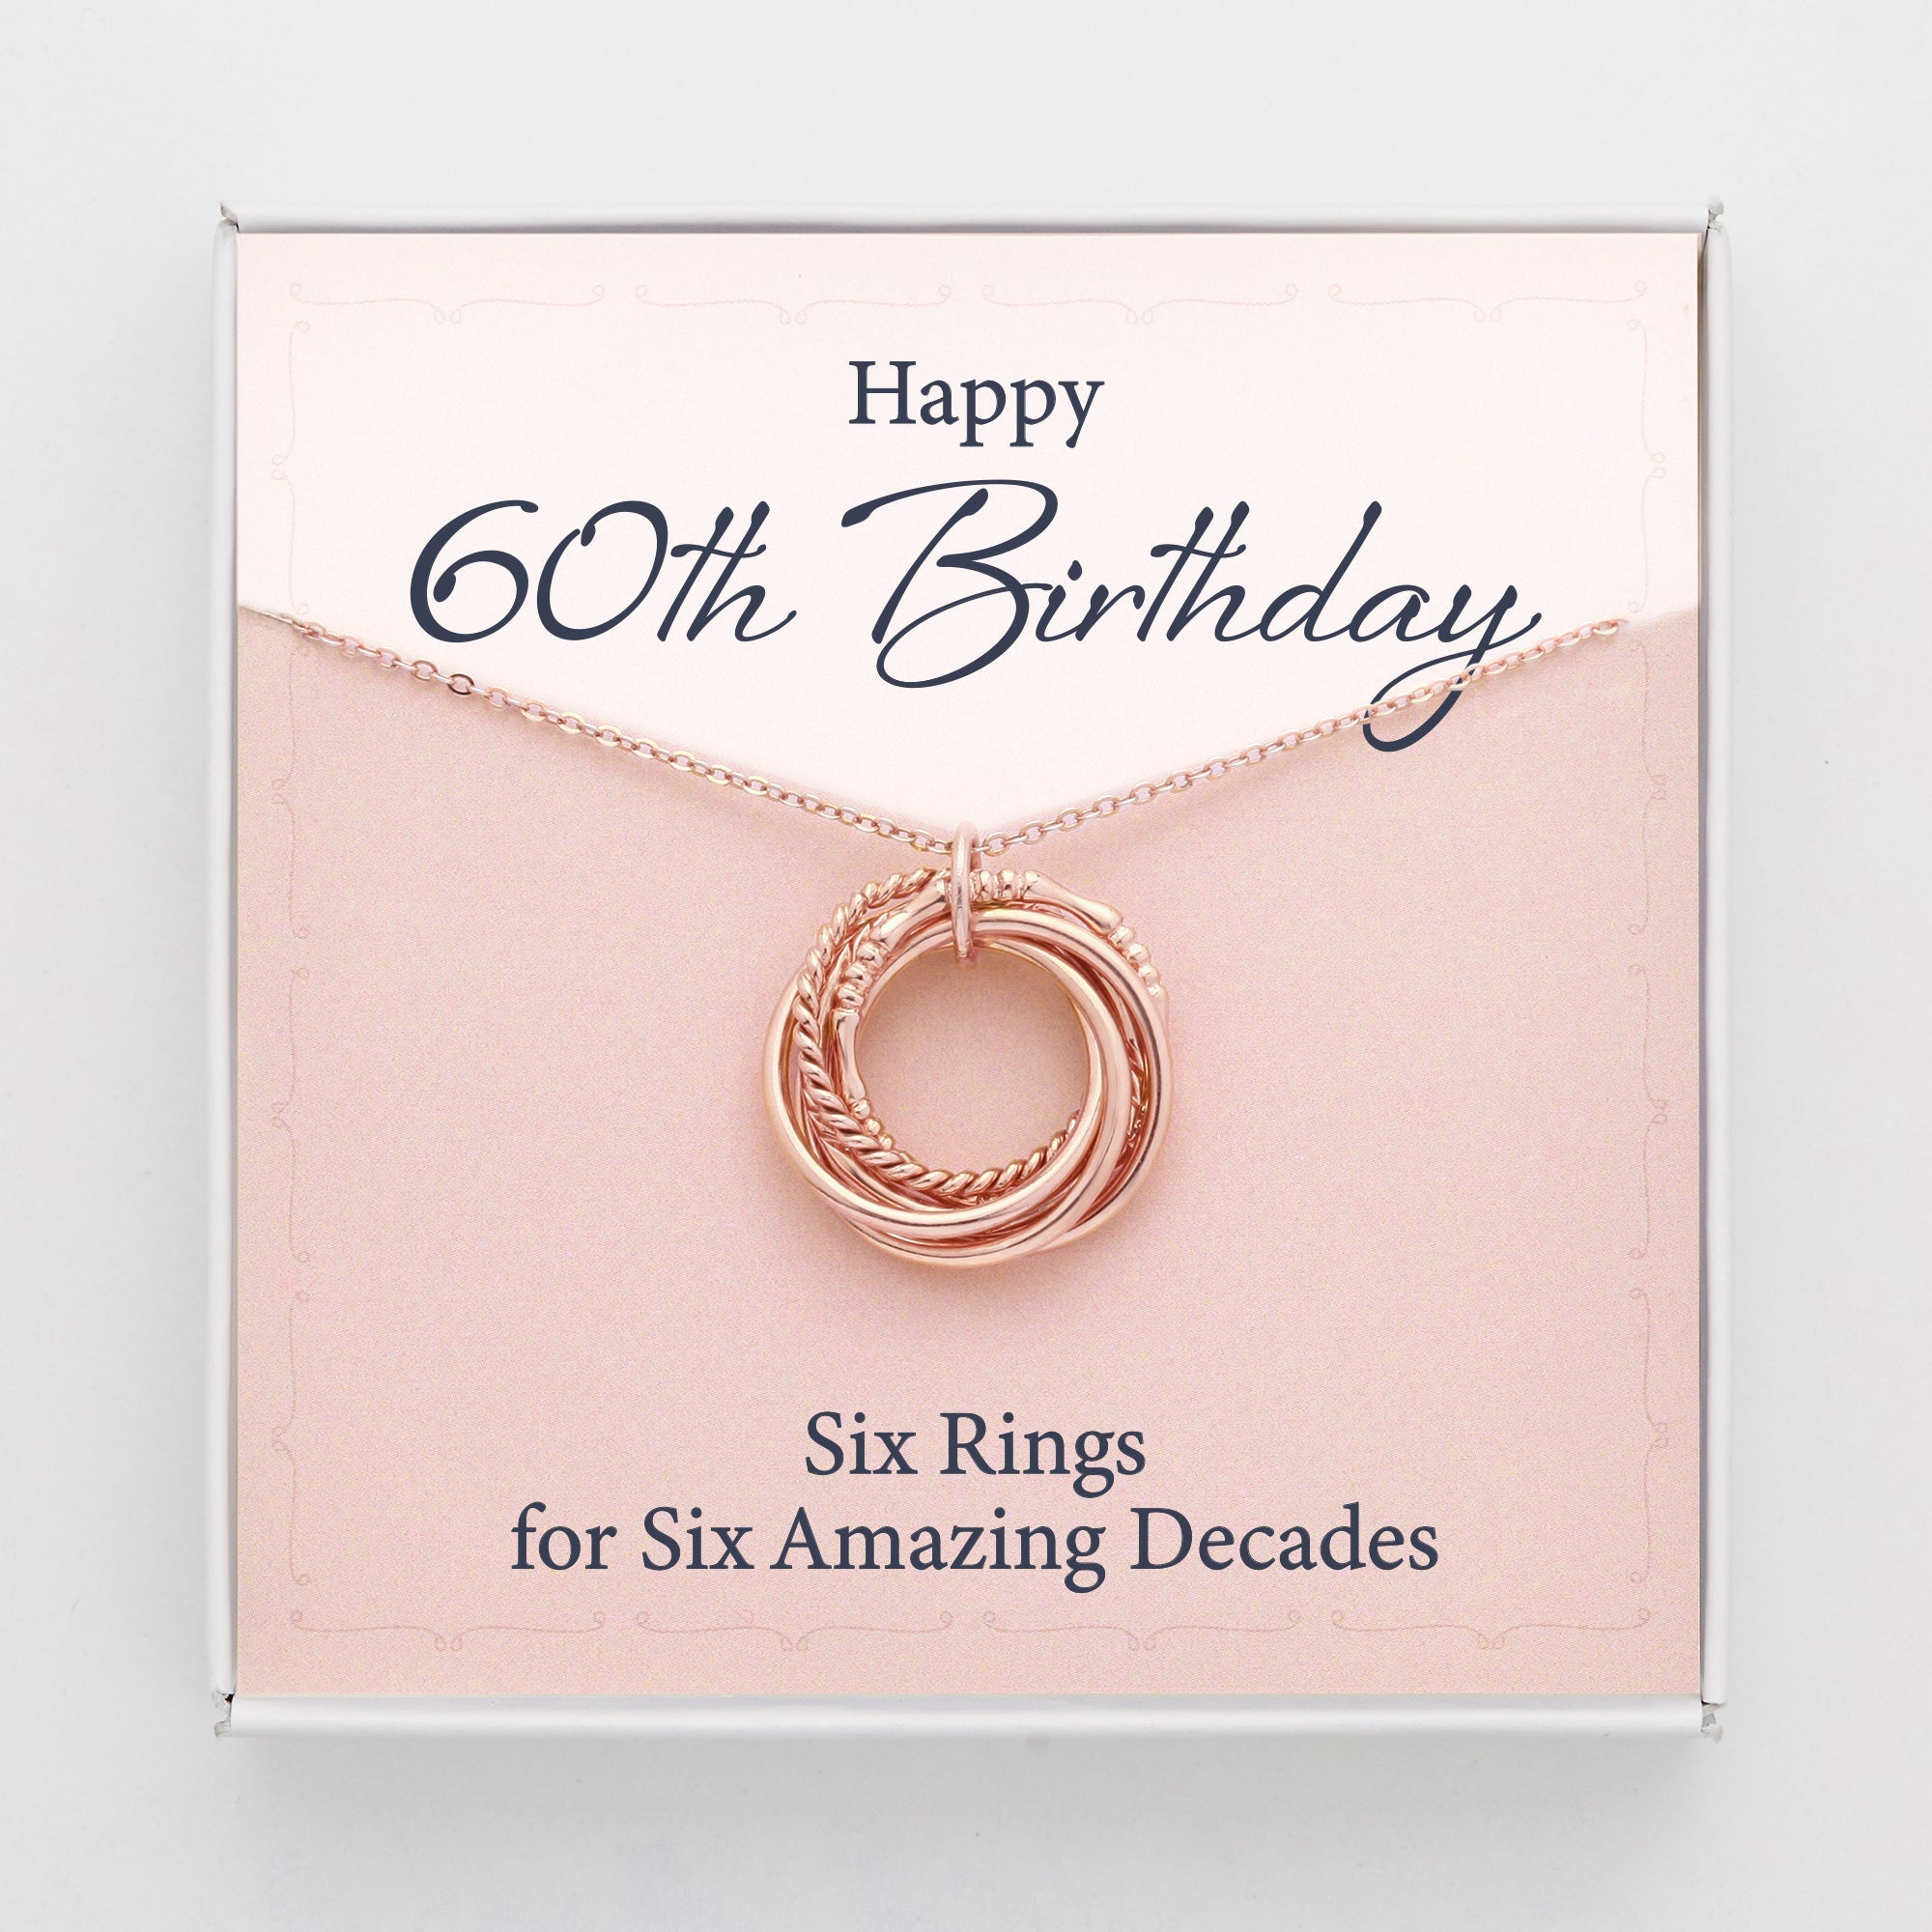 6 Ring Necklace for 60th Birthday Gift - Sterling Silver with Birthstones - Handmade and Packaged in Gift Box Bijou Her